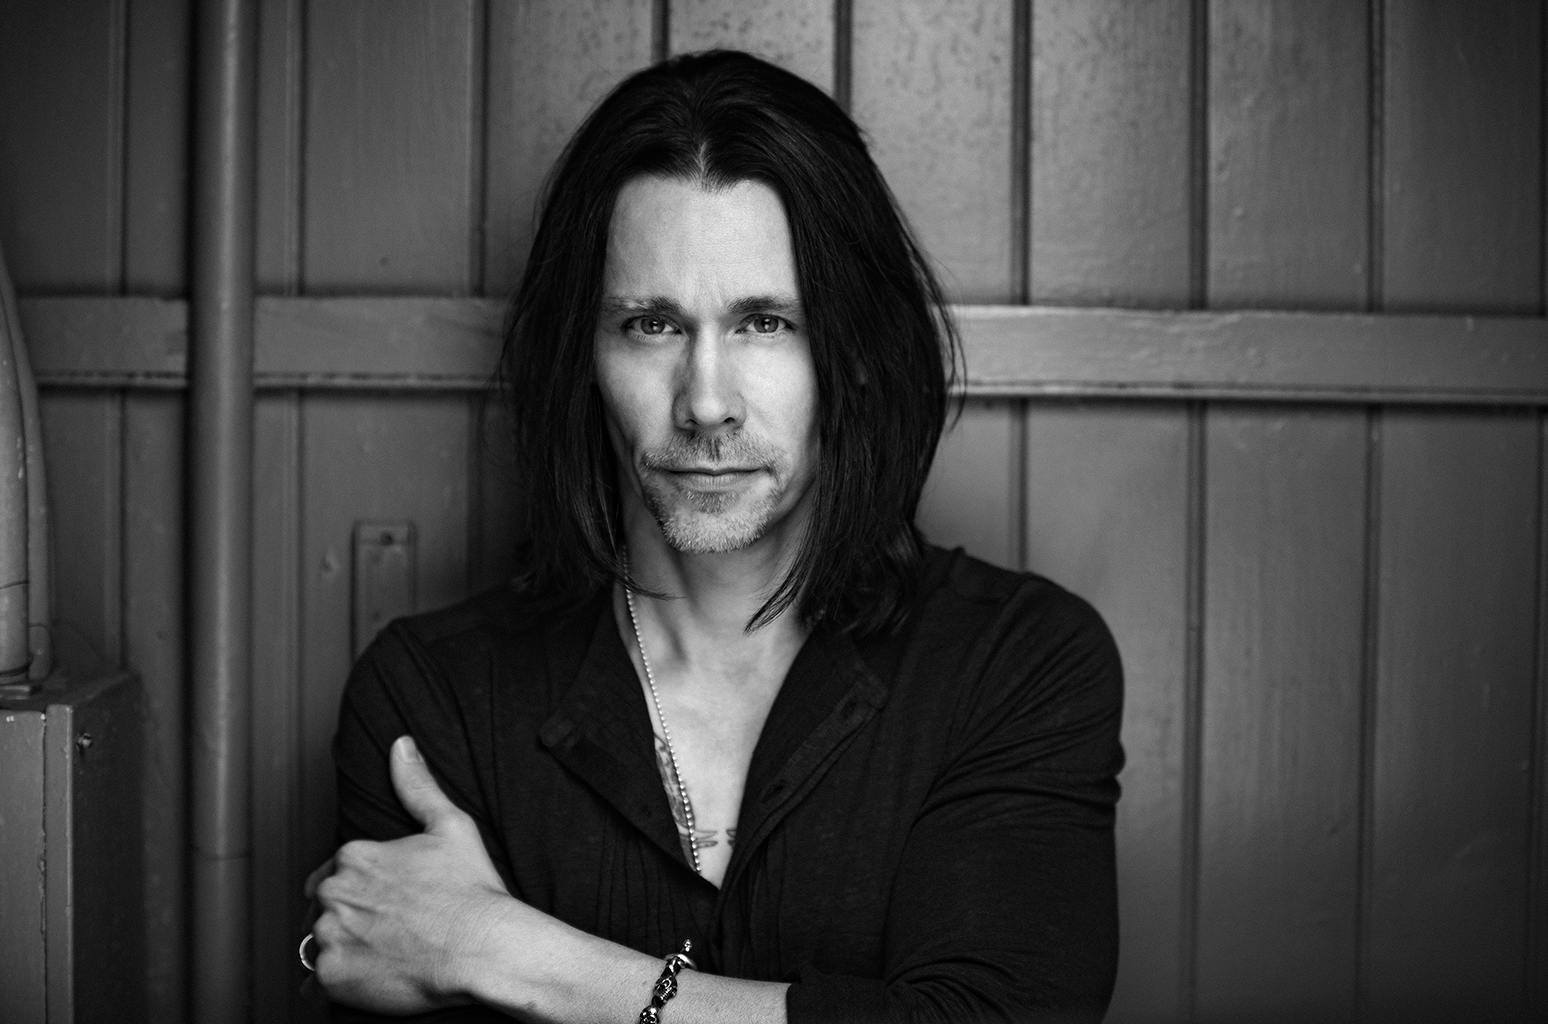 6 things you probably didn’t know about Myles Kennedy